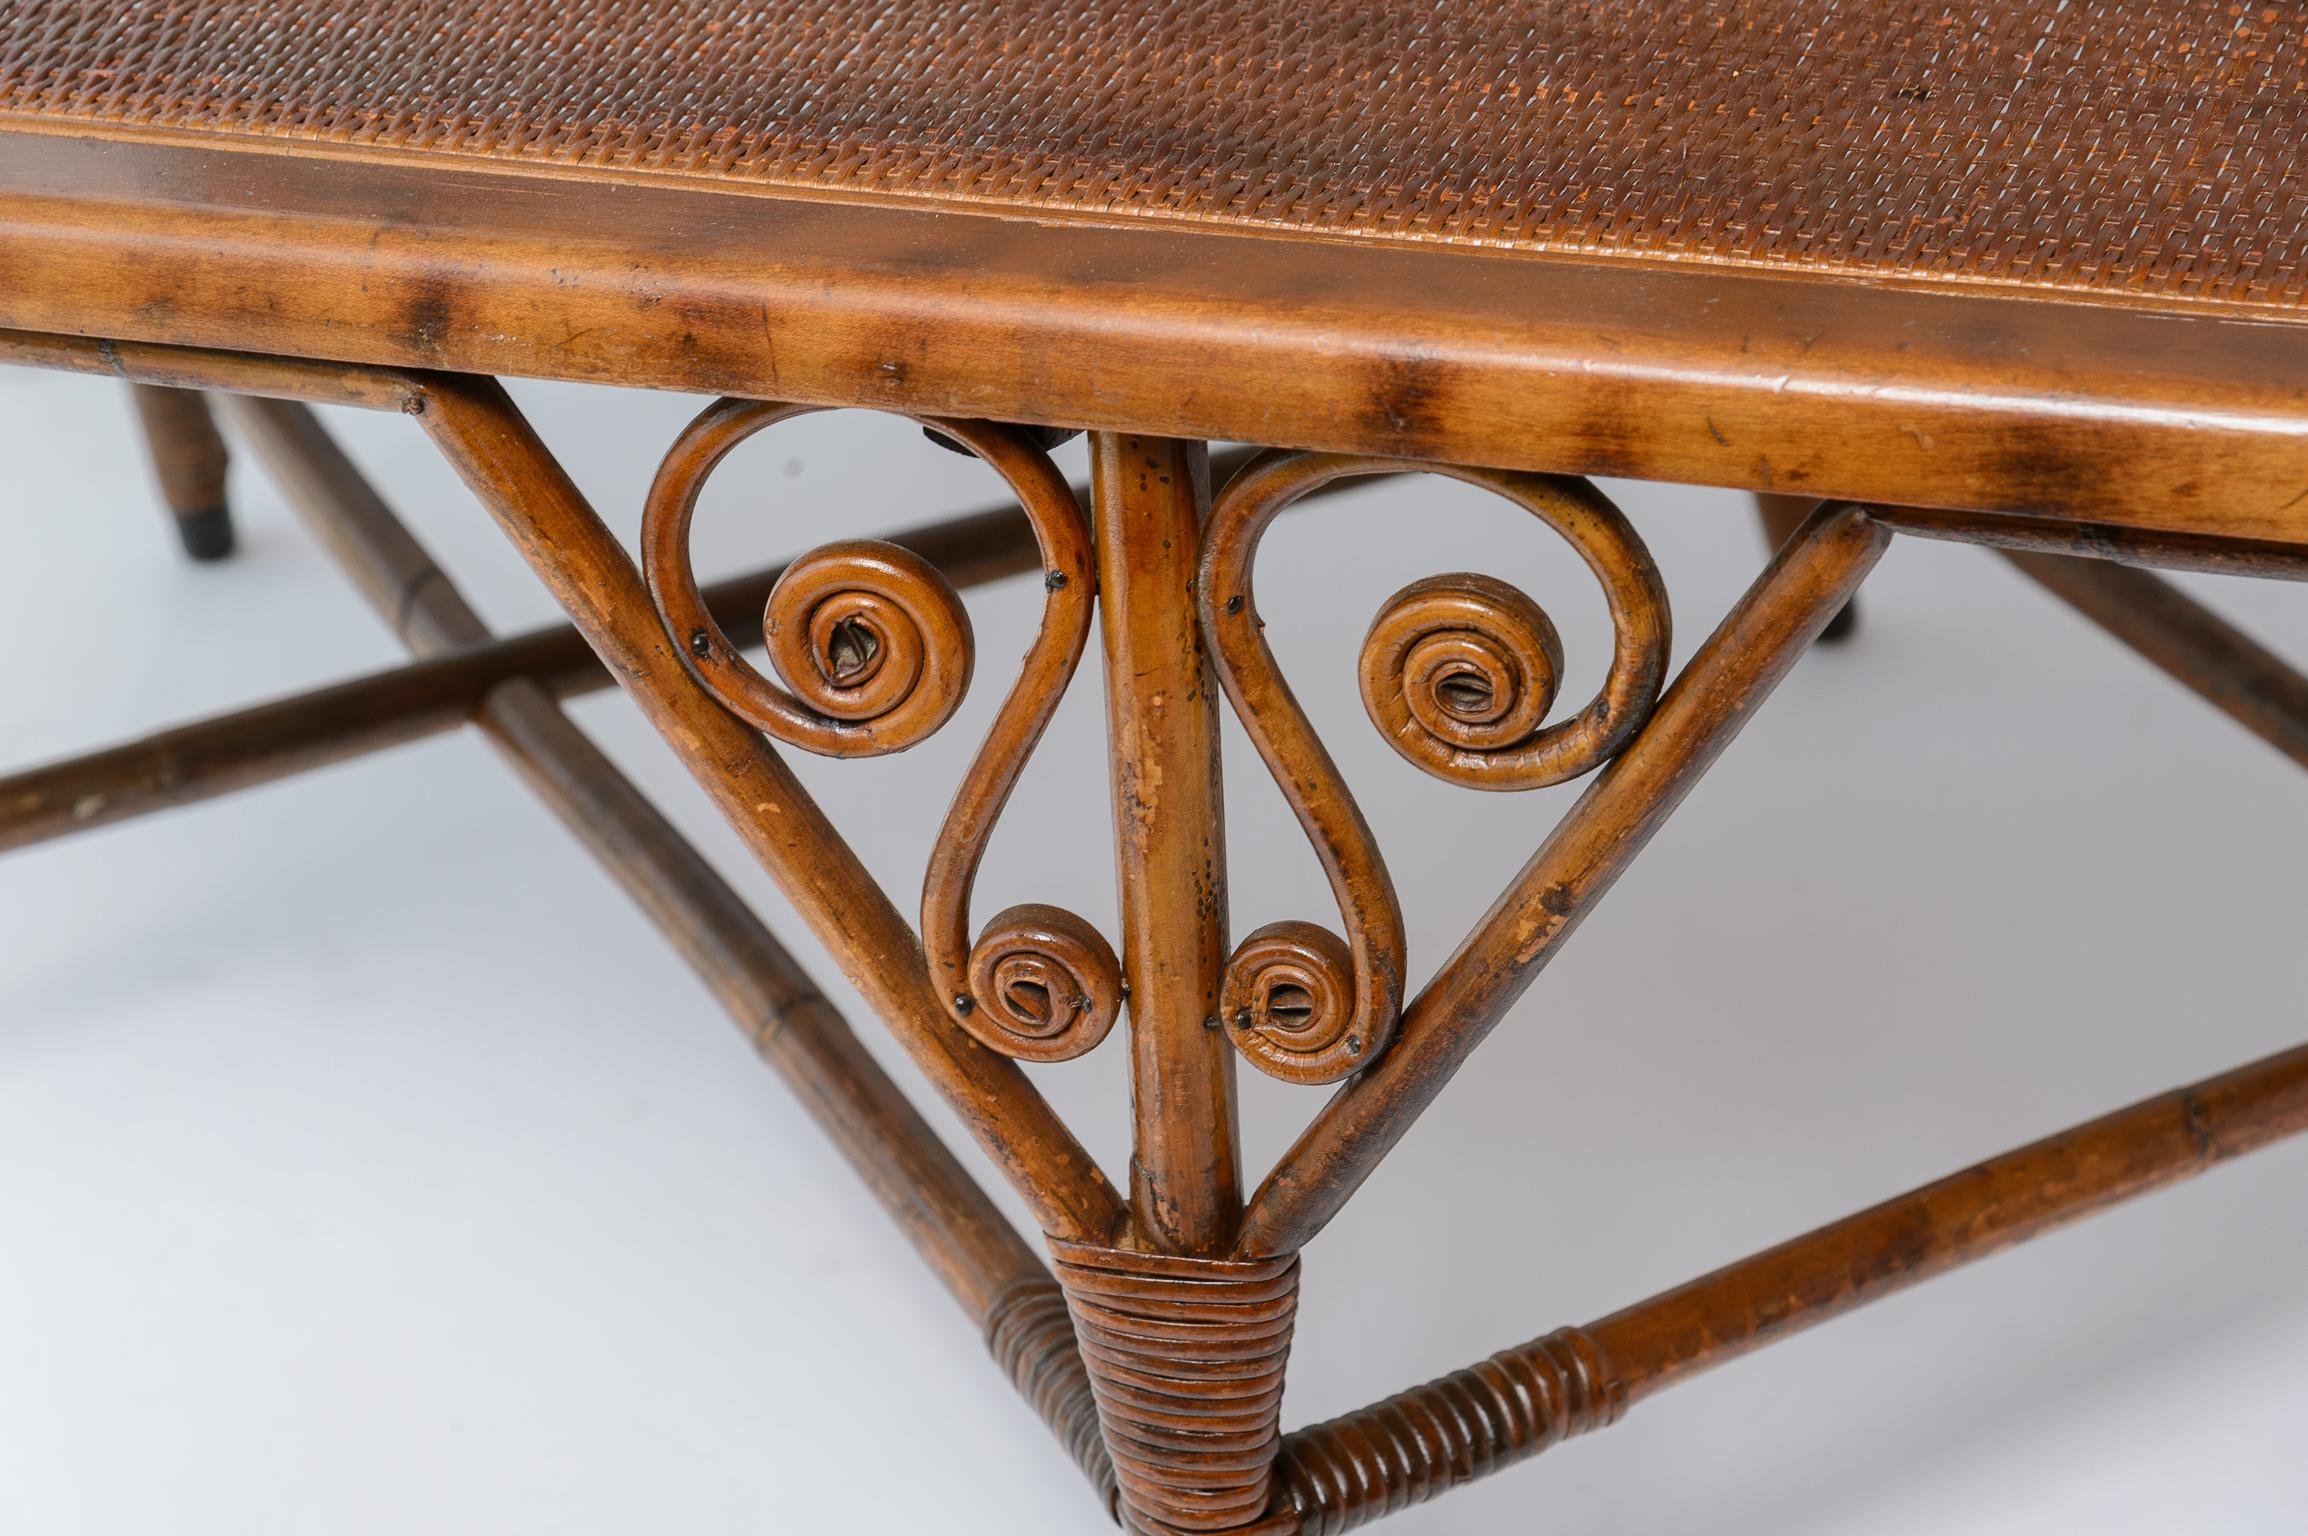 Antique Bentwood & Cane Settee, Attributed to Michael Thonet, C1900-1920s For Sale 3